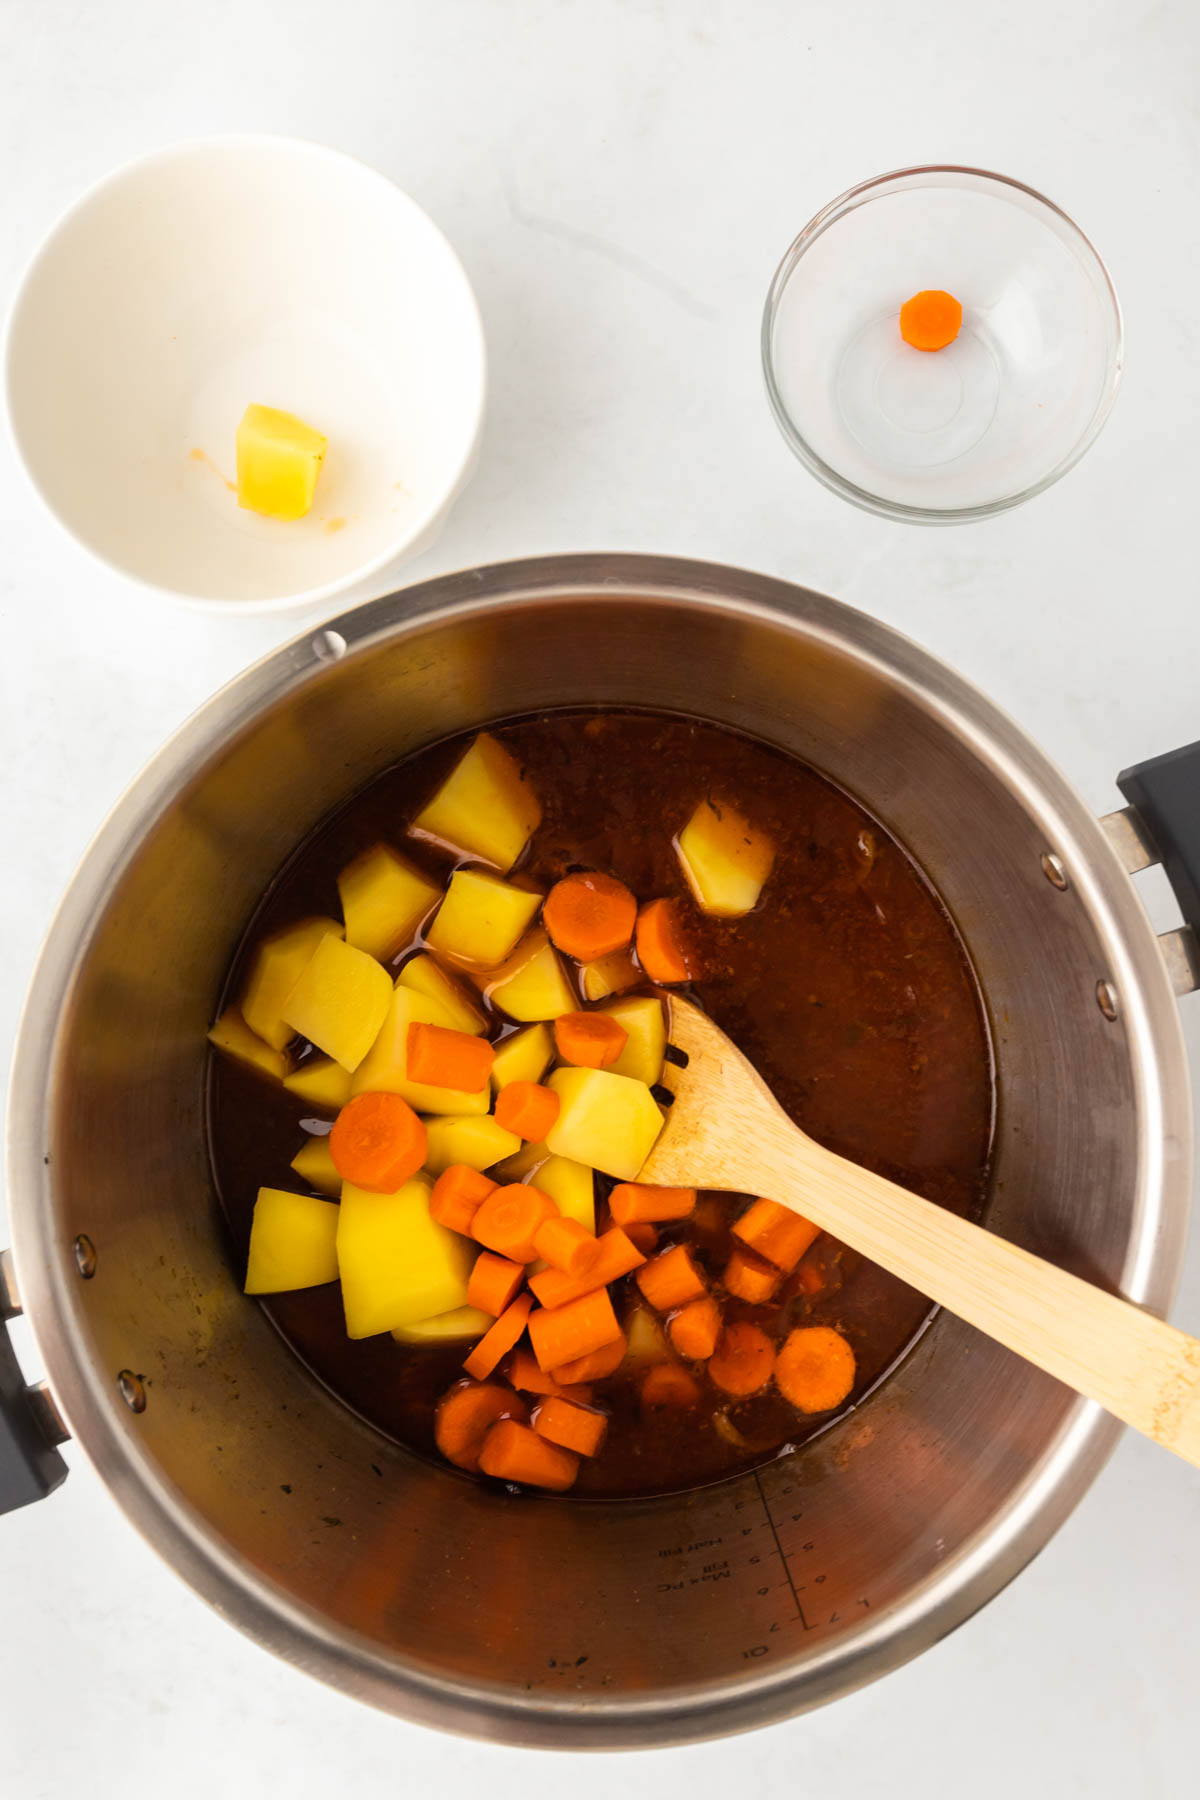 Chopped potatoes and carrots are added to broth in an Instant Pot.